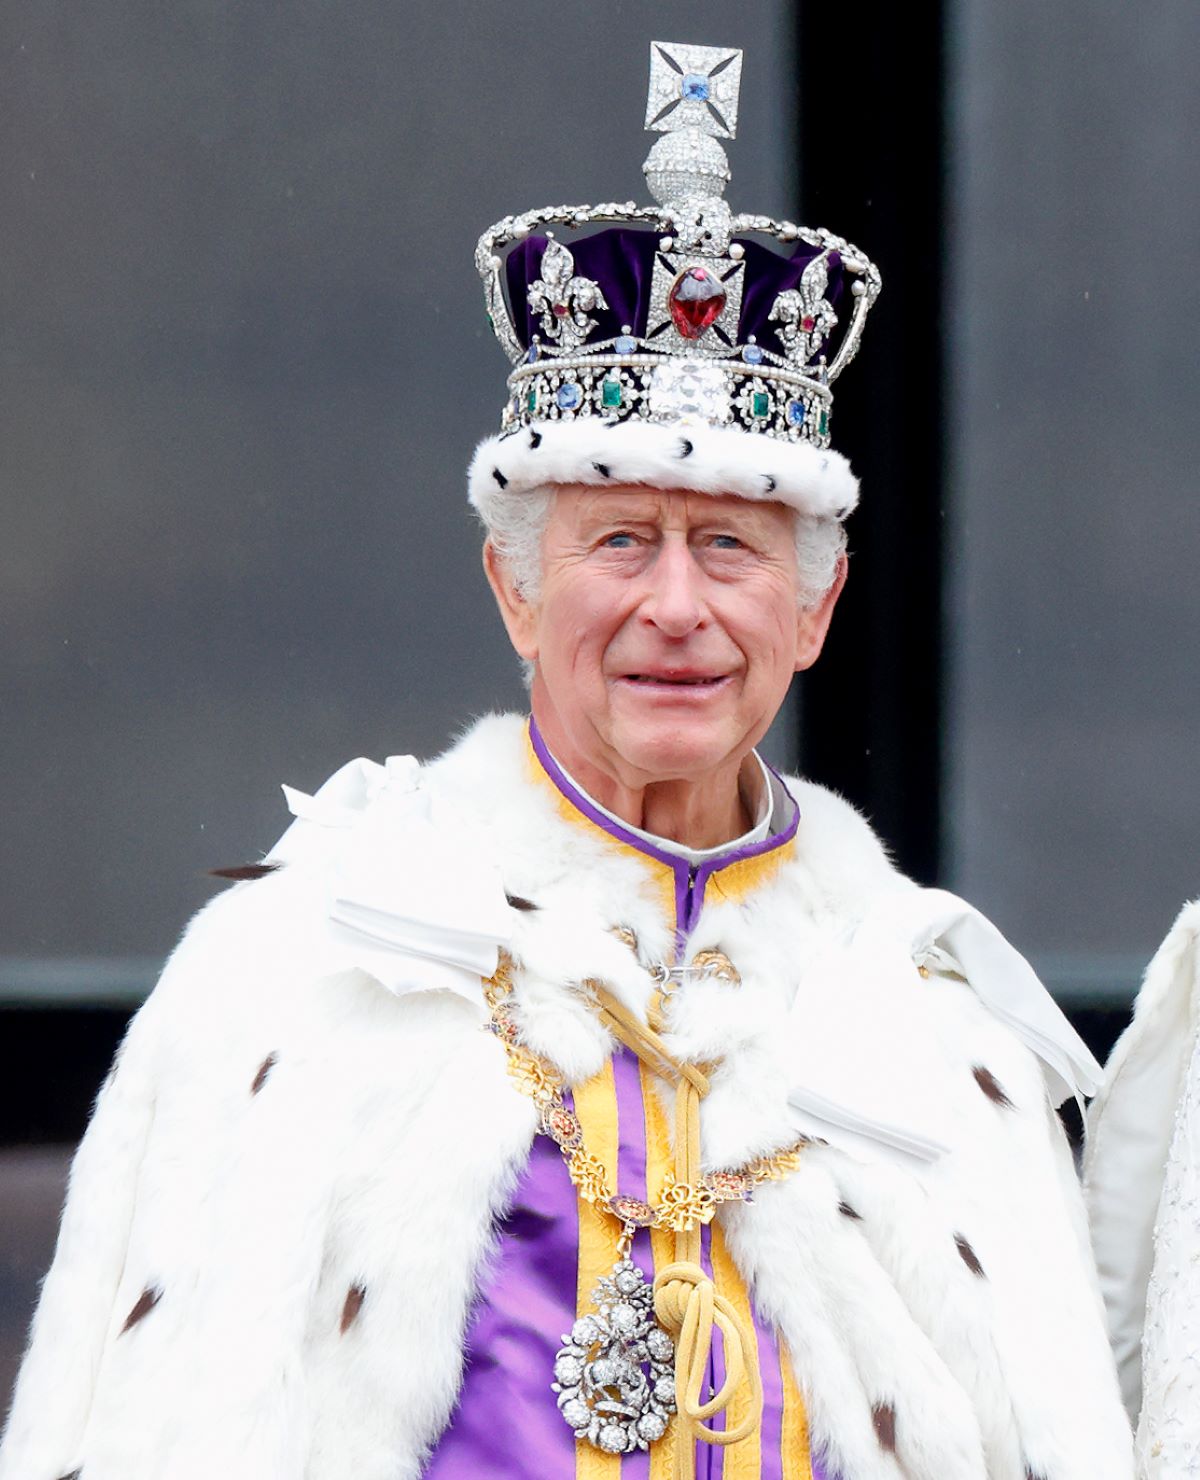 Why King Charles will not reign in the same way as Queen Elizabeth II